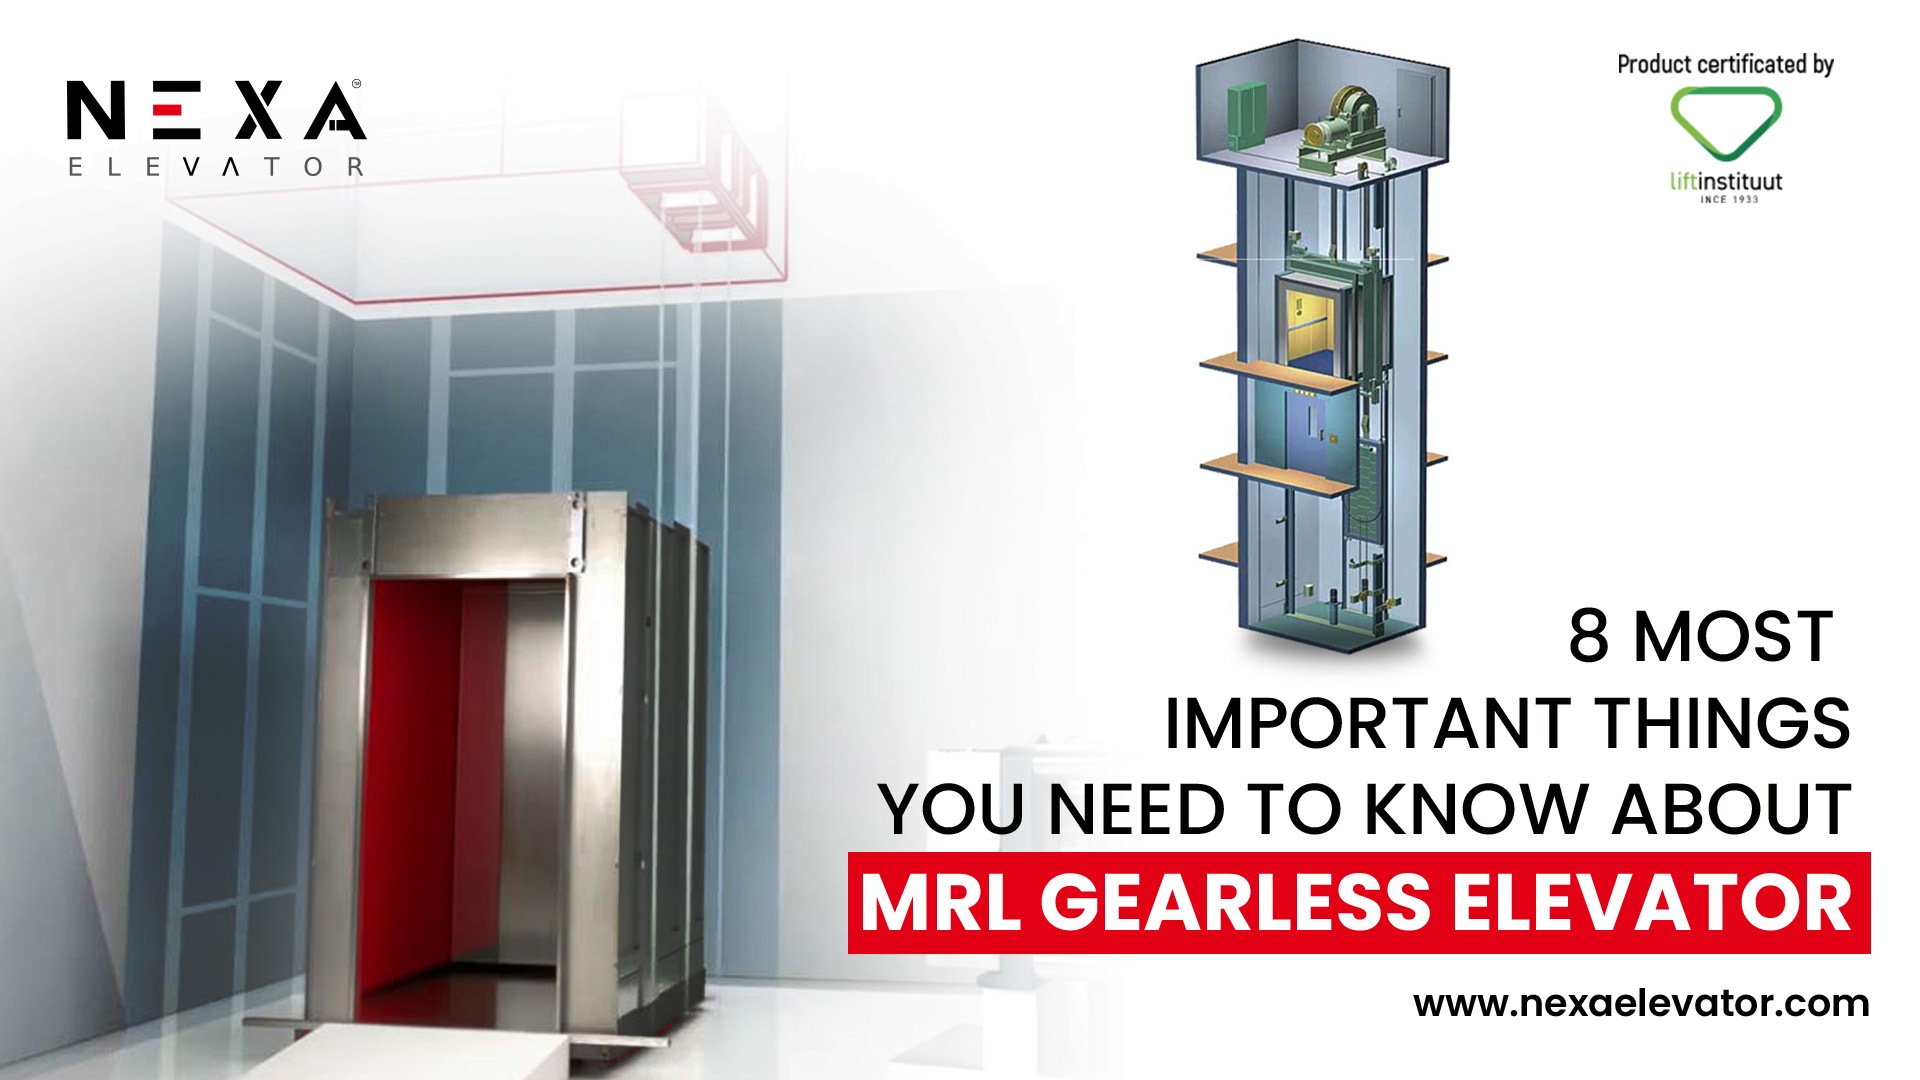 8 Most Important Things You Need to Know About MRL Elevators